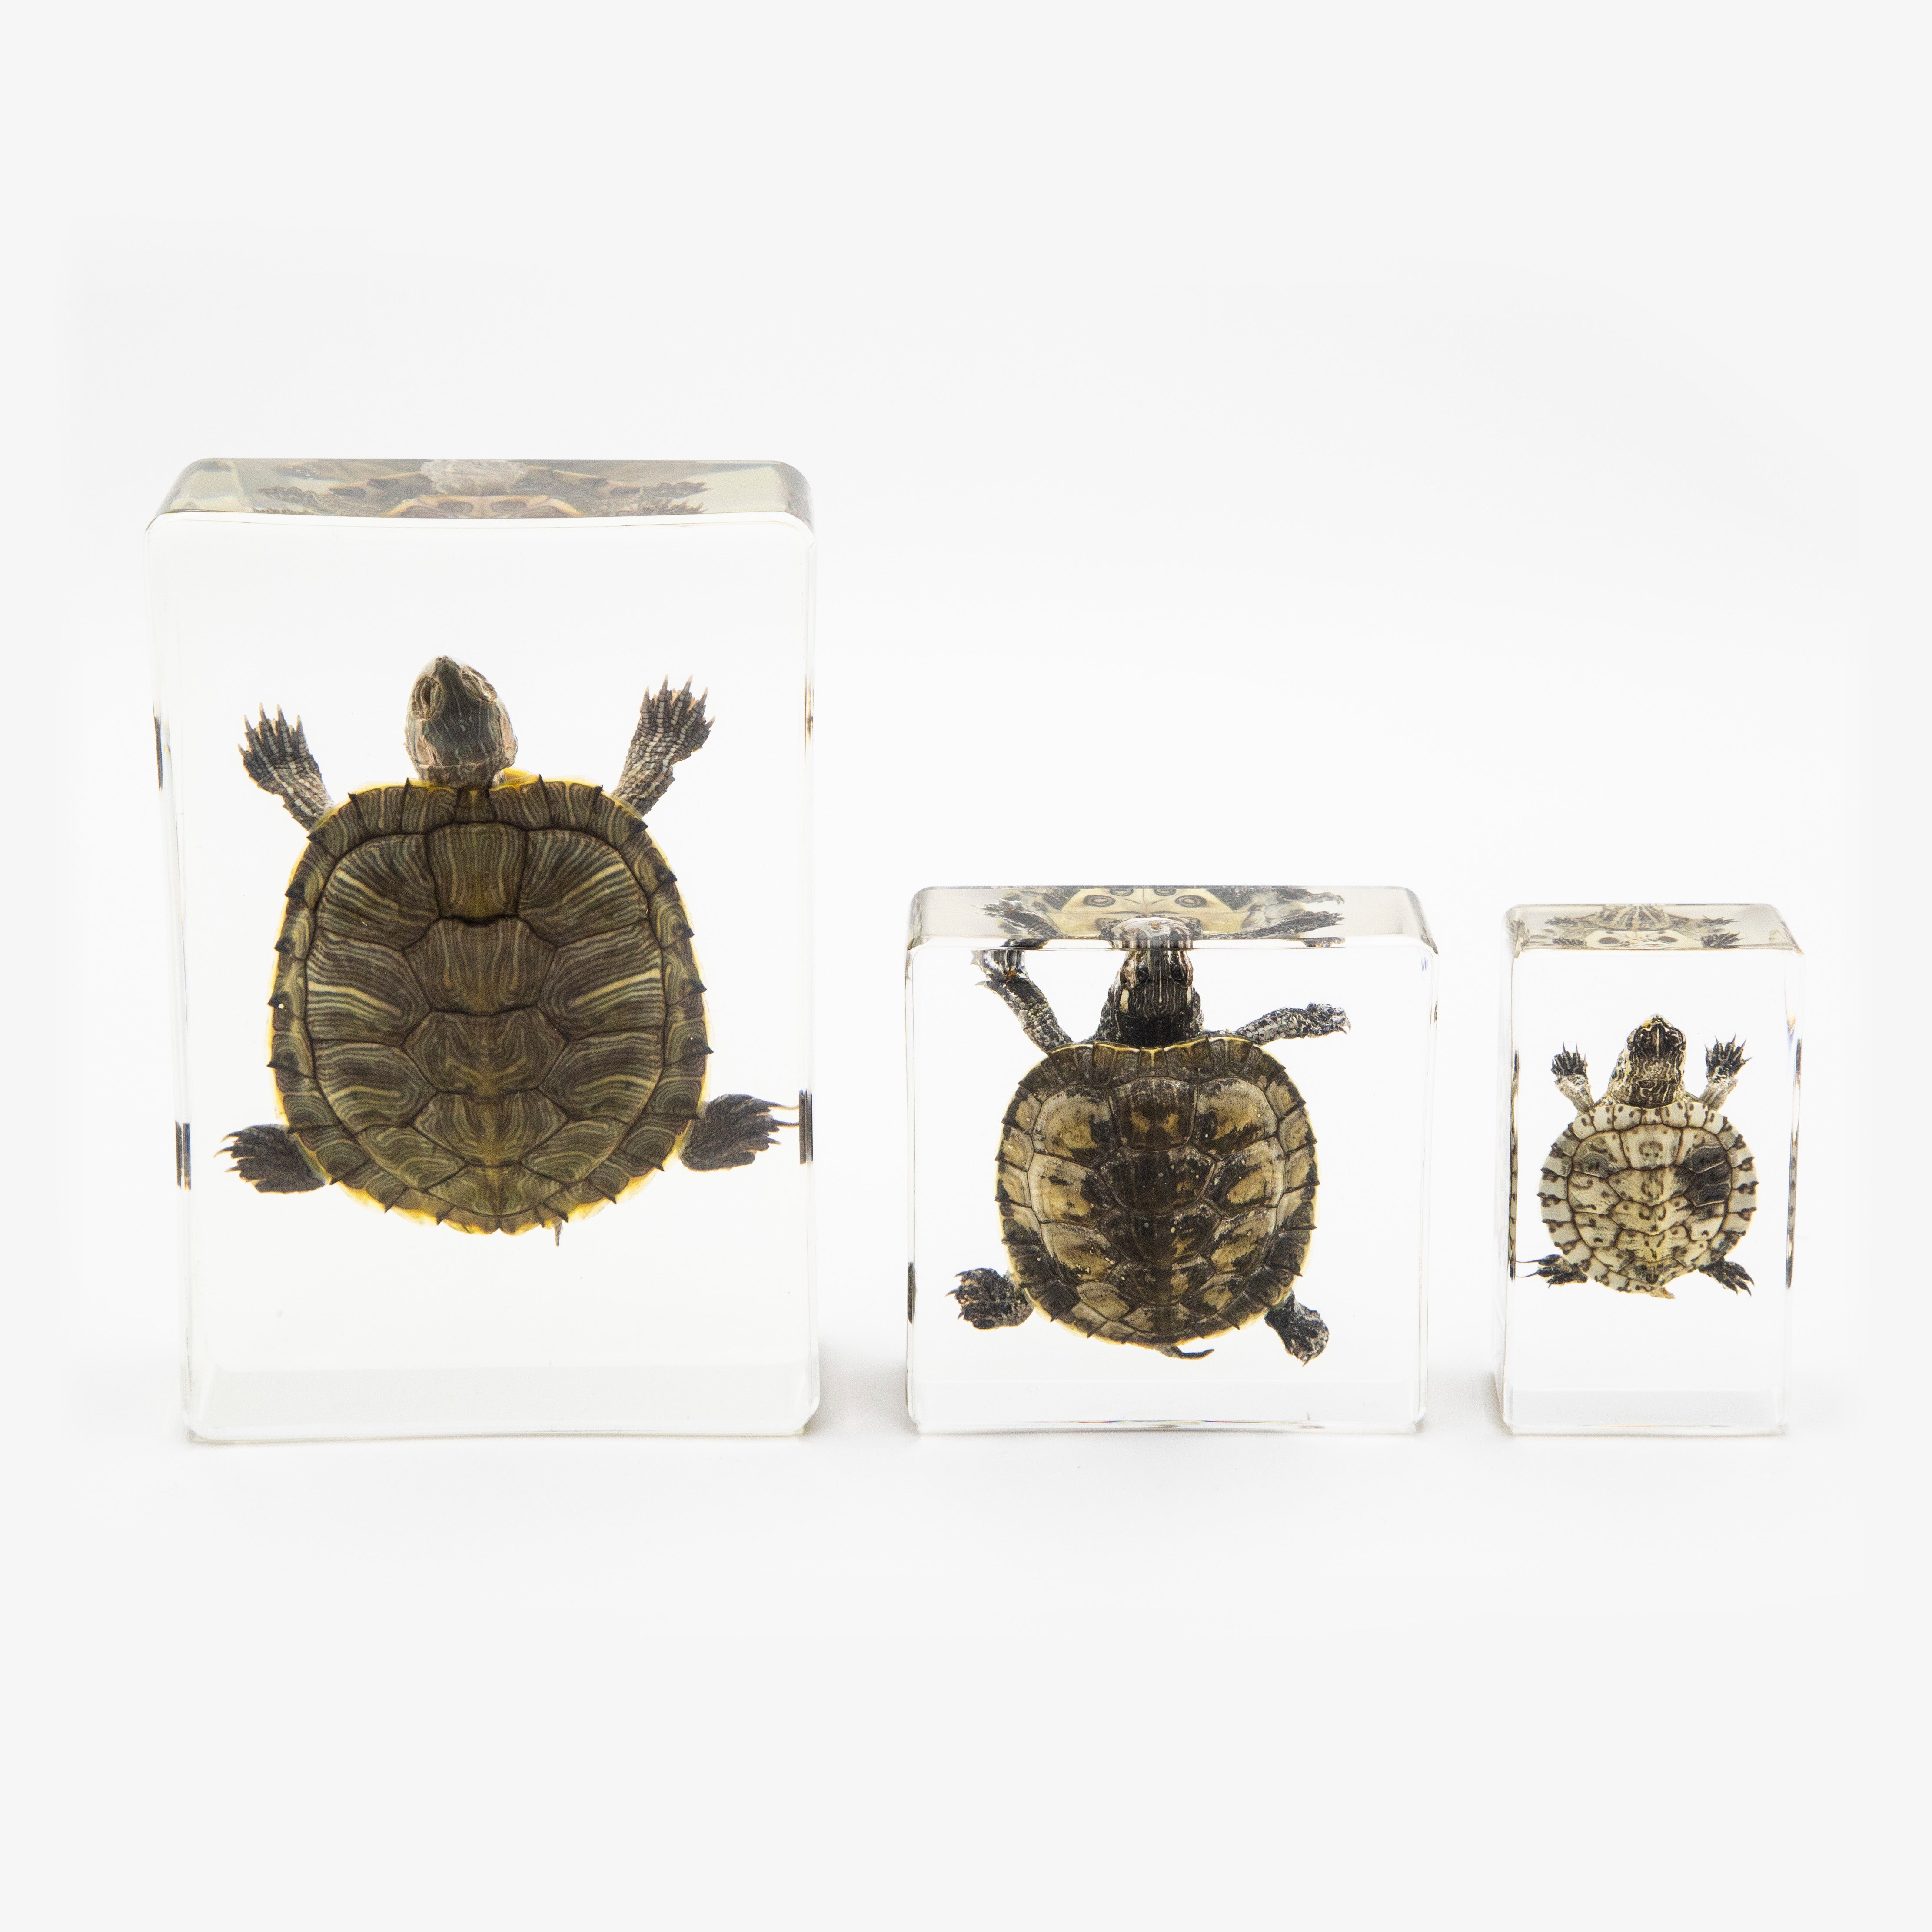 Real Turtle Resin Paperweight